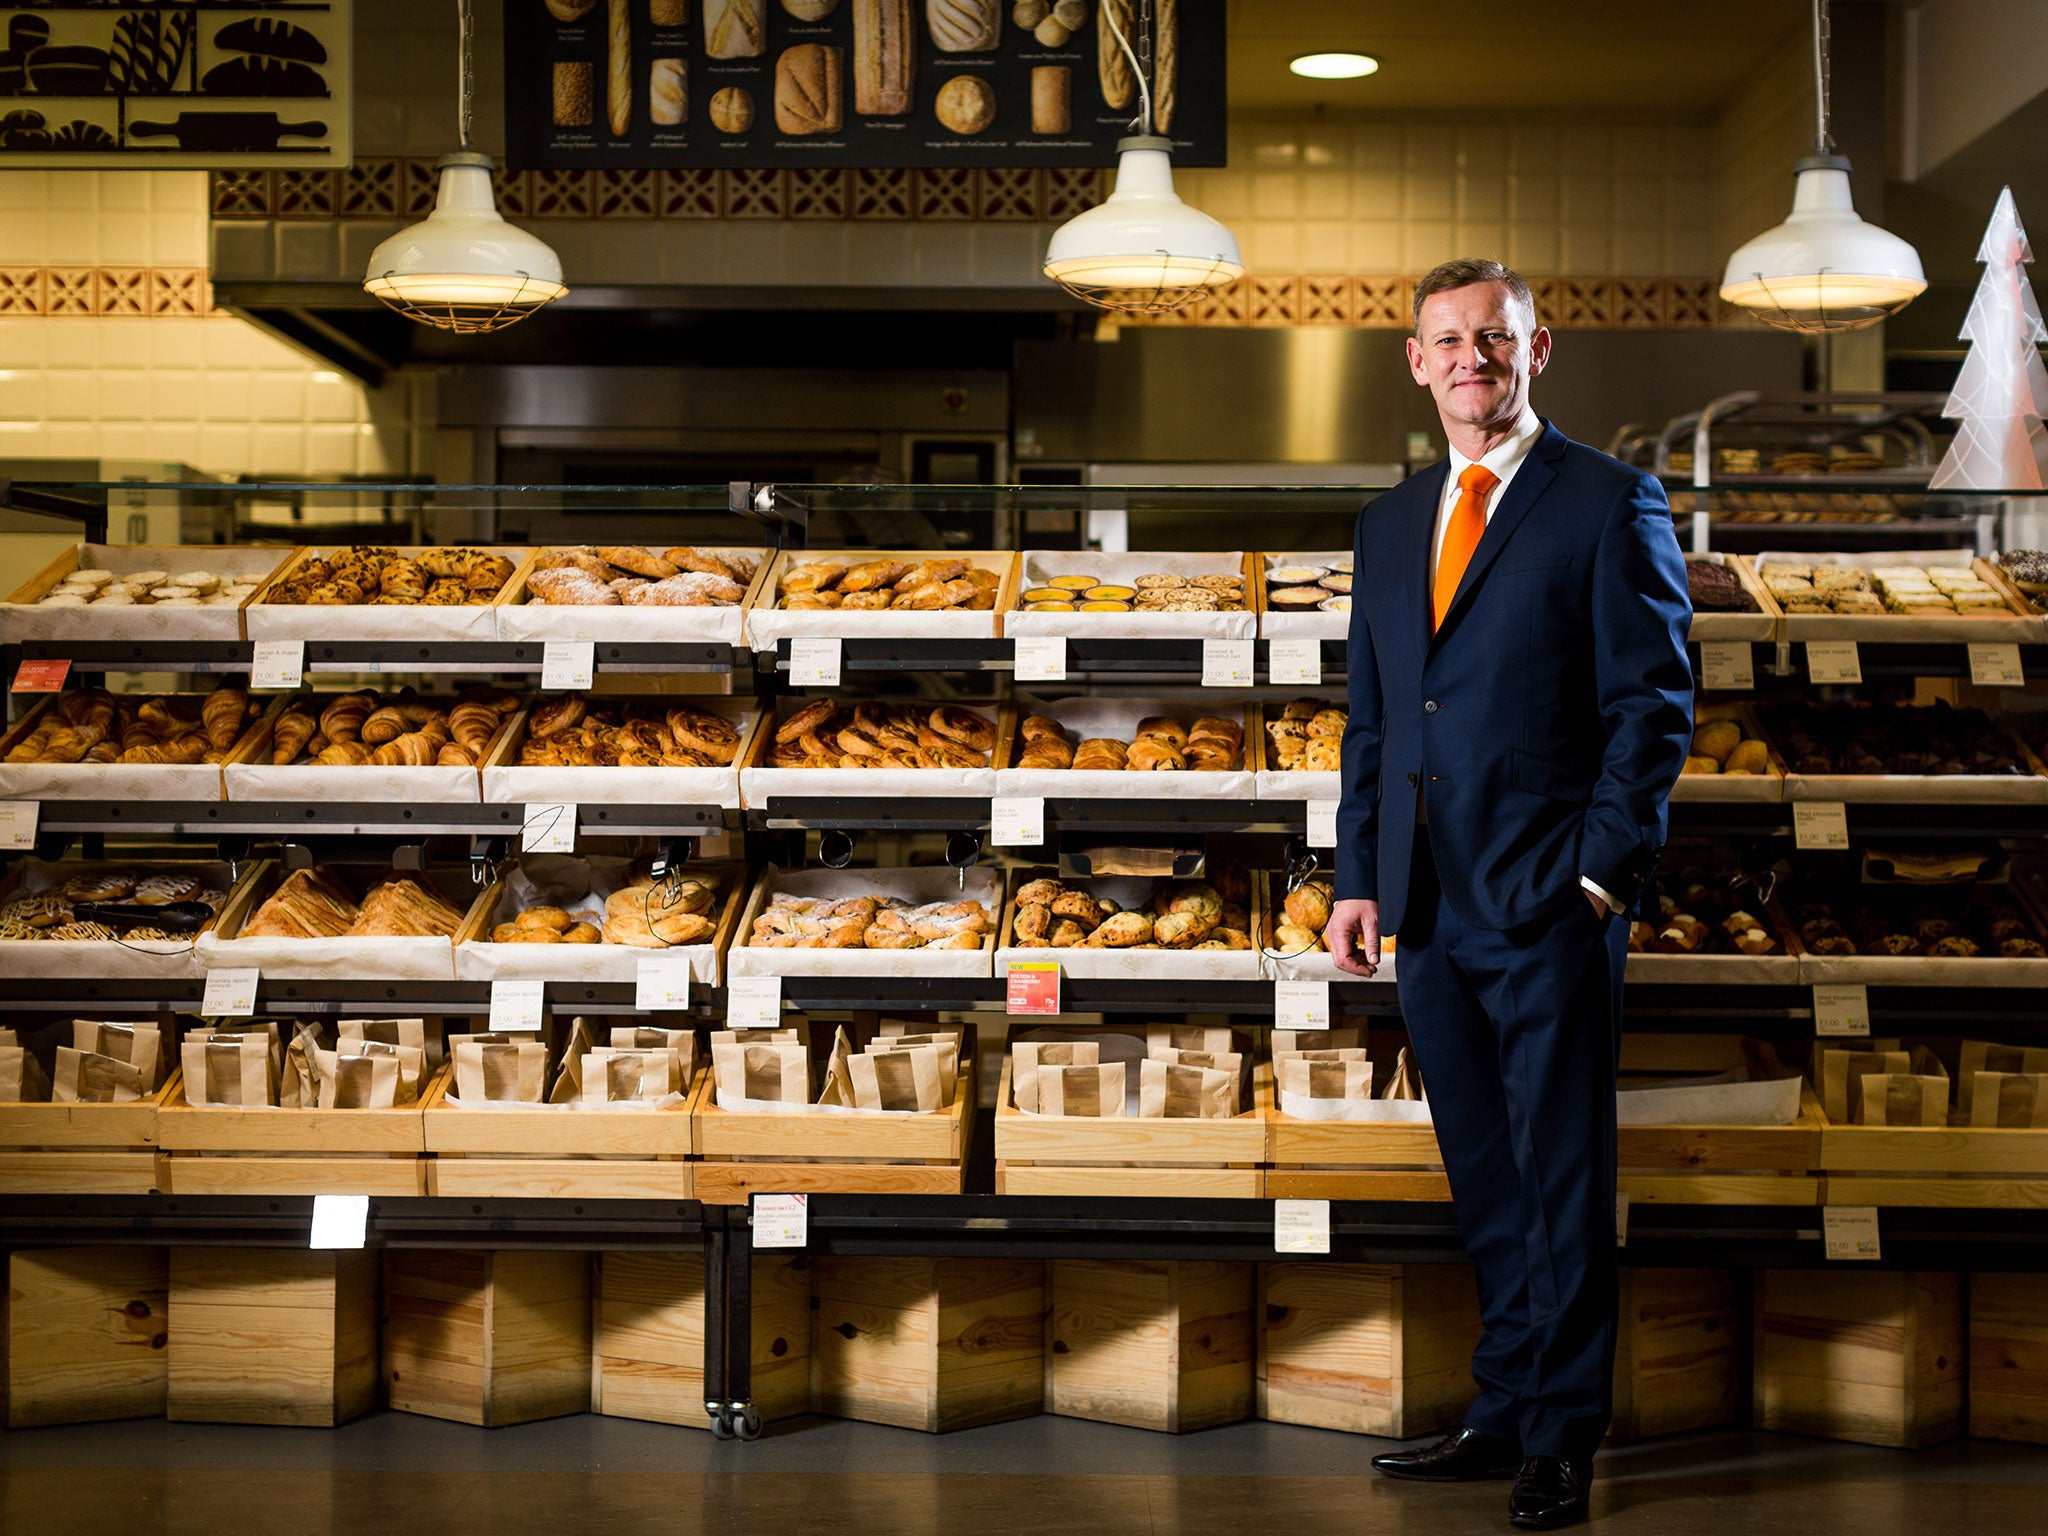 M&S chief executive Steve Rowe has been focusing his energies on the food business